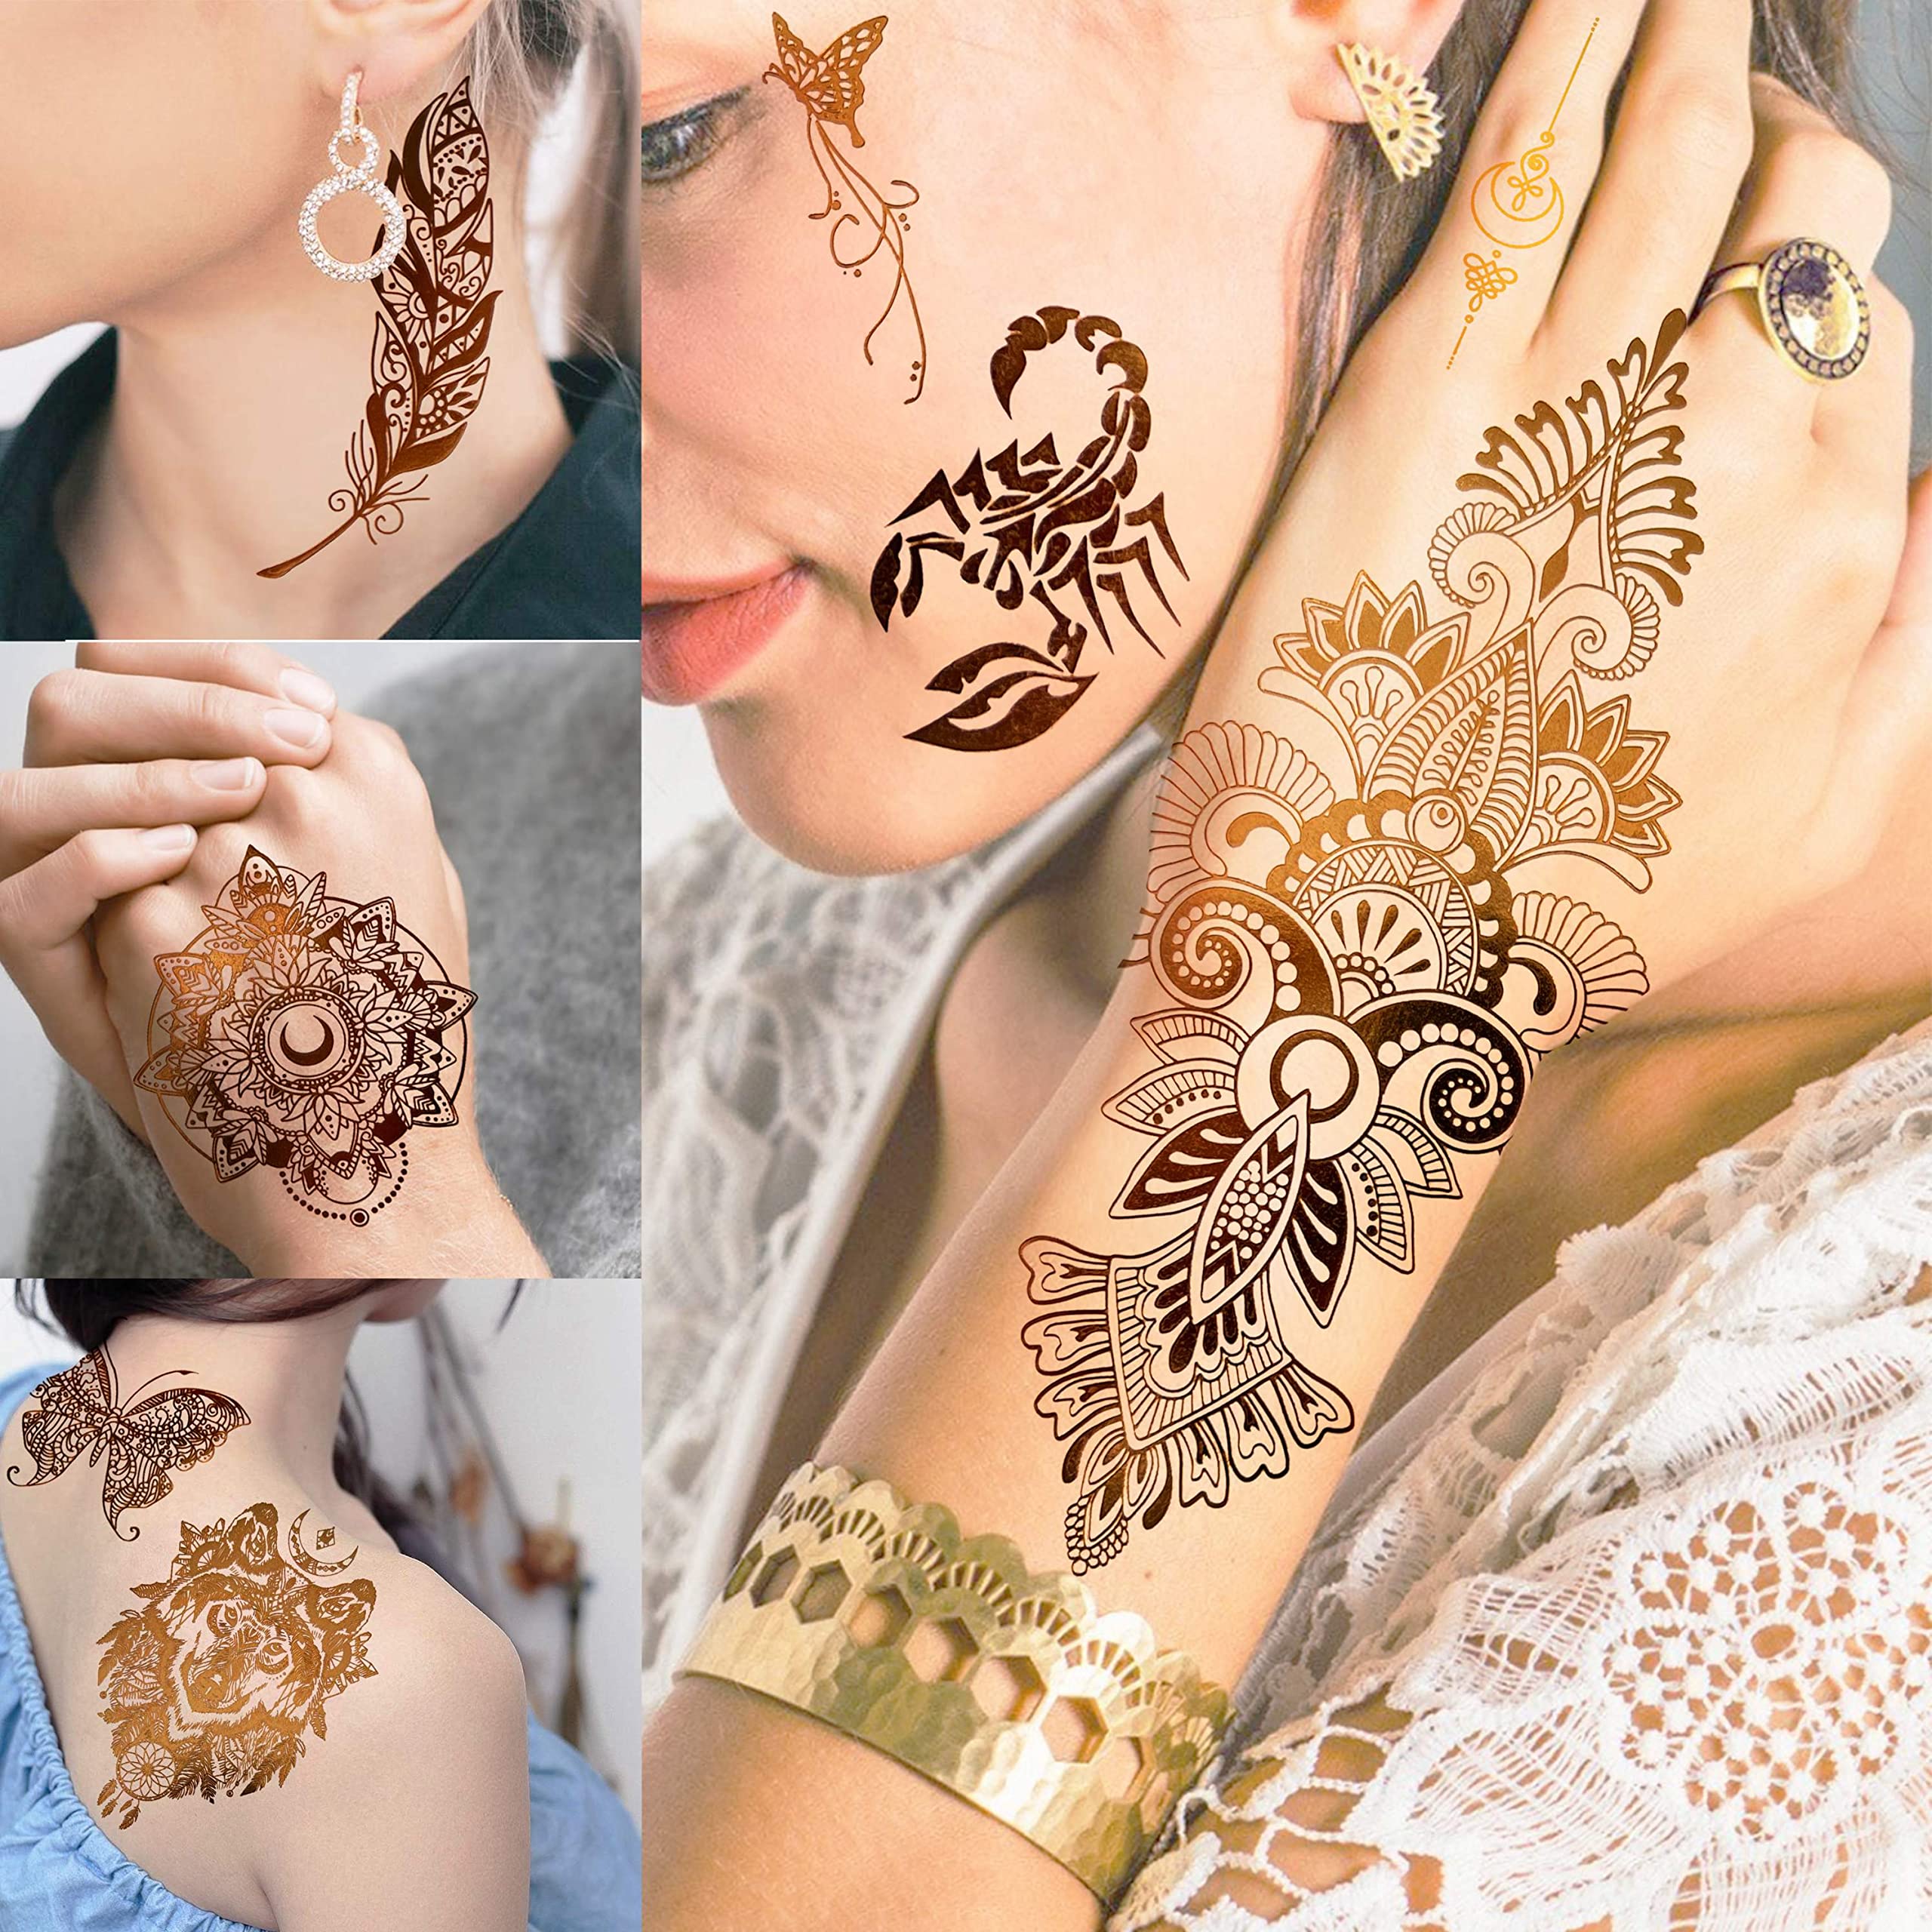 Gold and Silver Metallic Temporary Flash Jewelry Tattoos